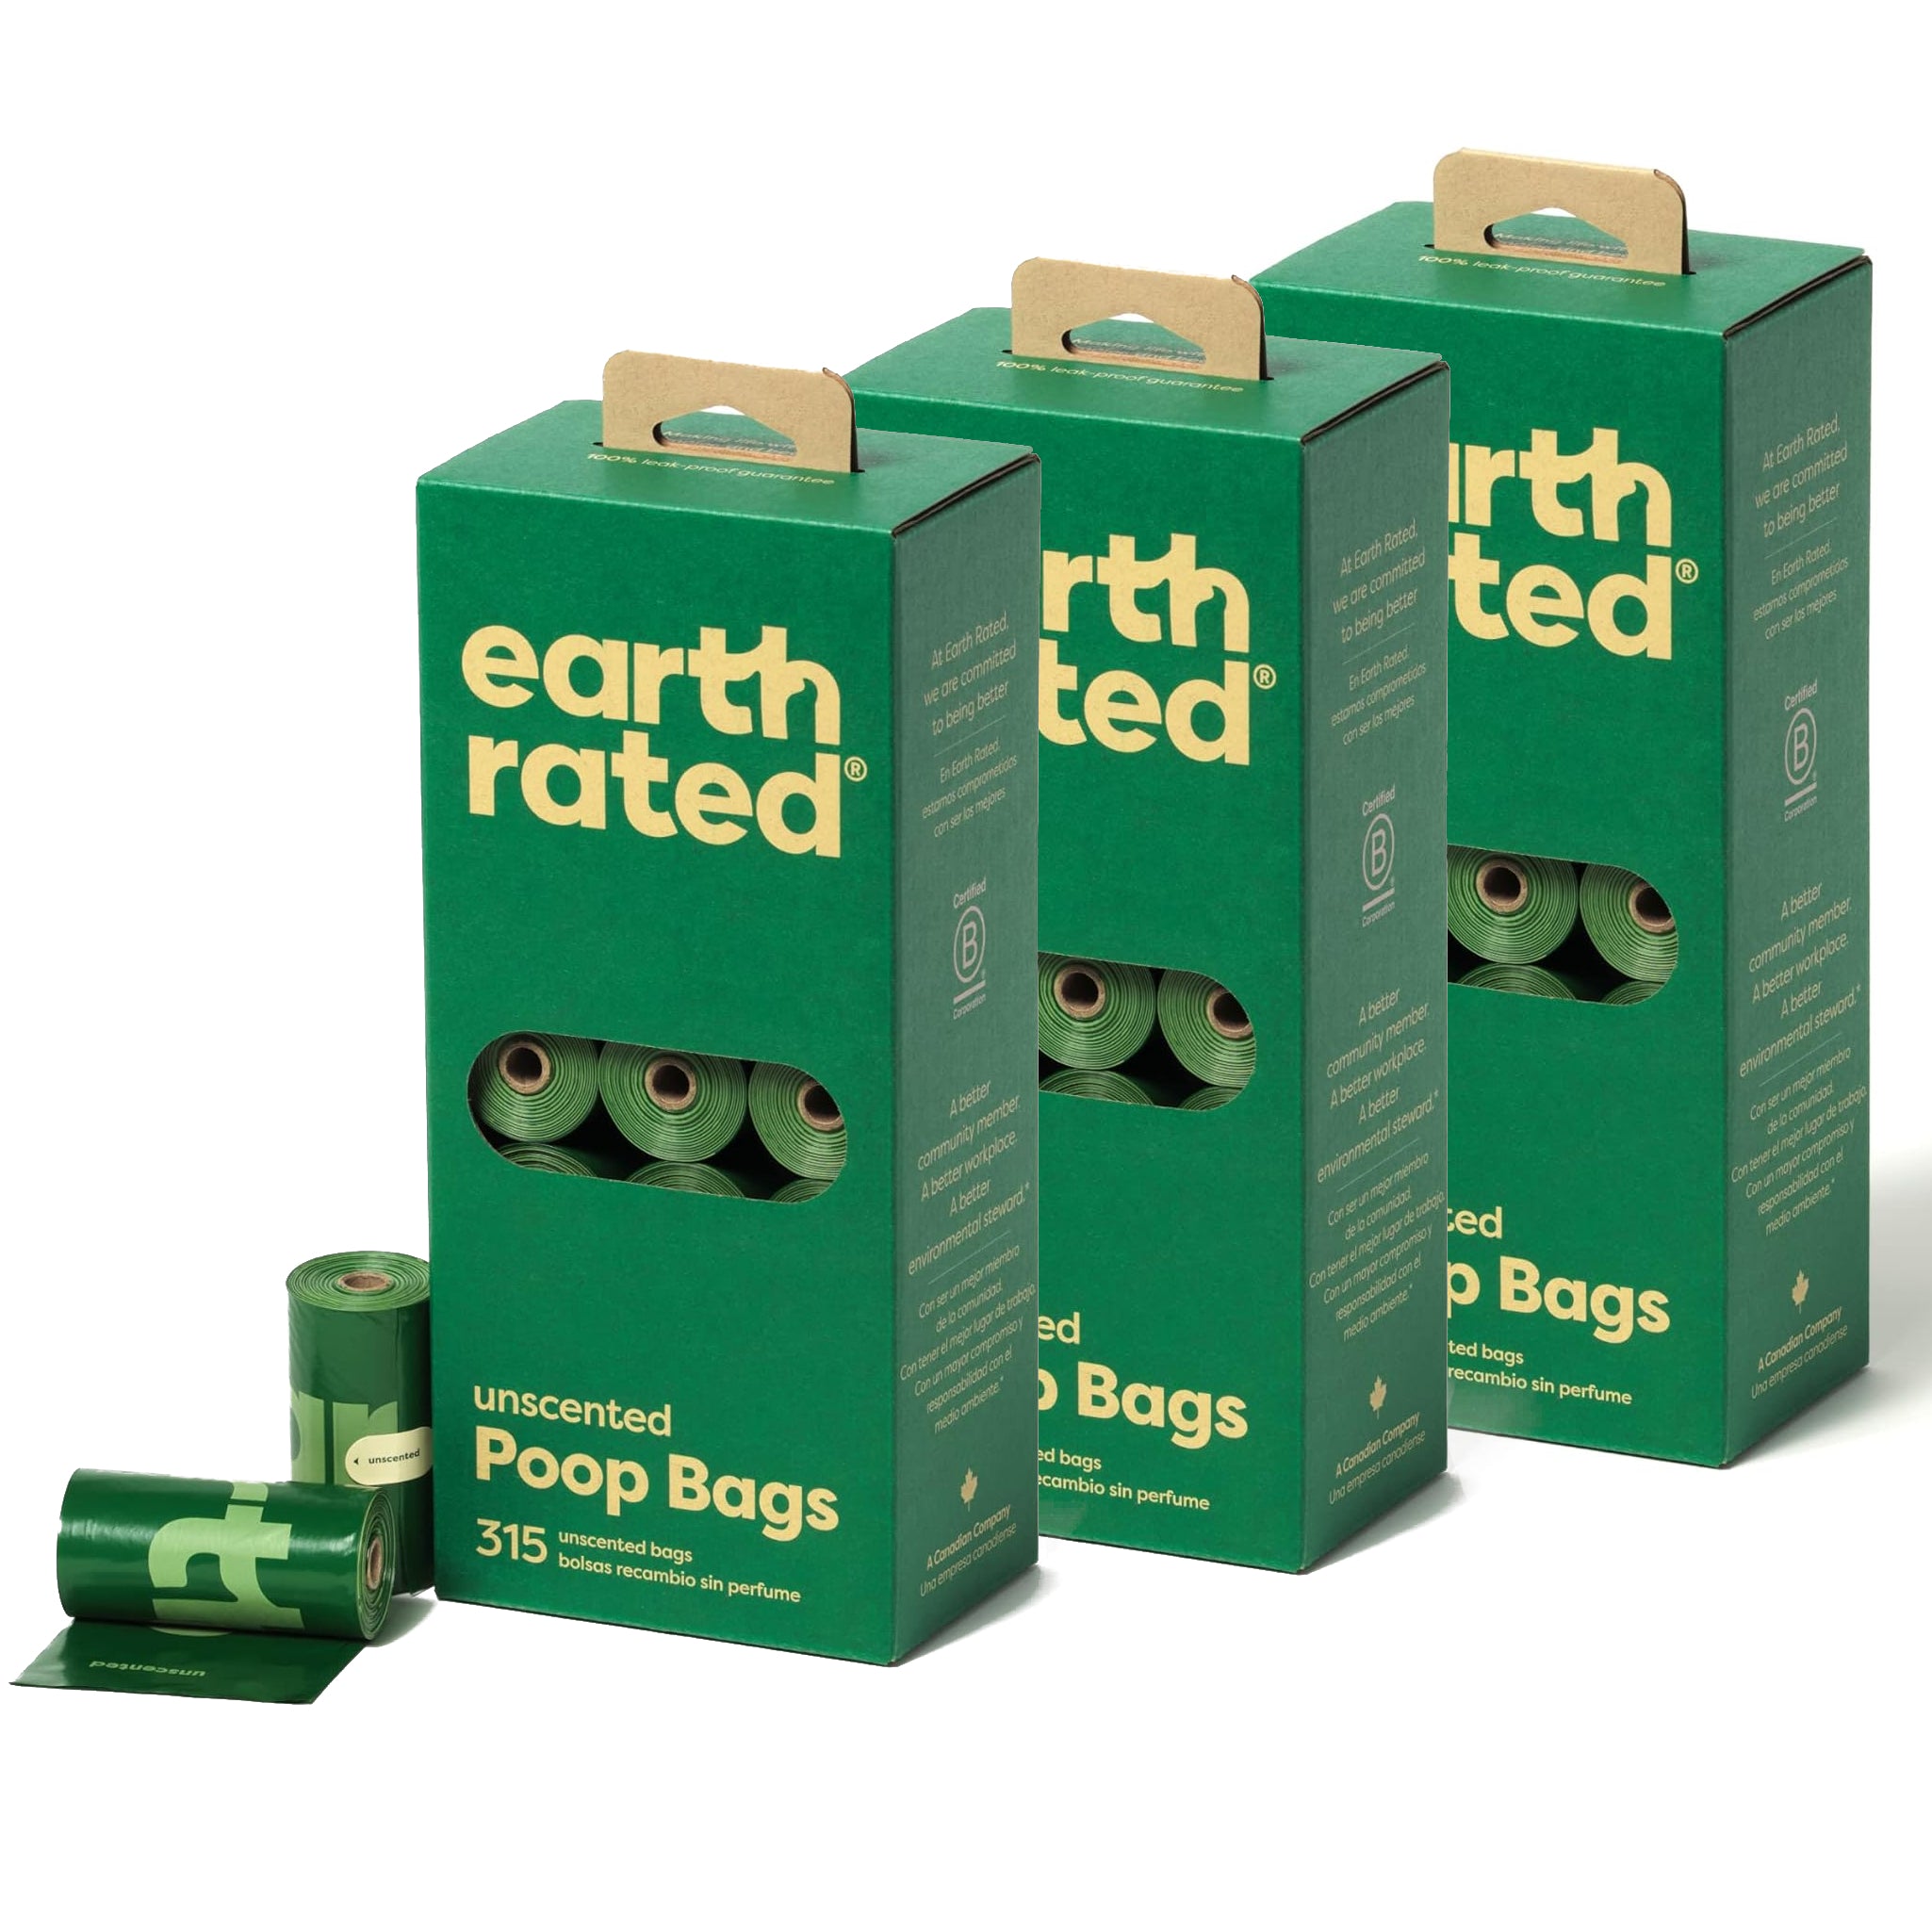 Earth Rated Poo Bags 63 Rolls (945) Unscented (3 box BULK deal)